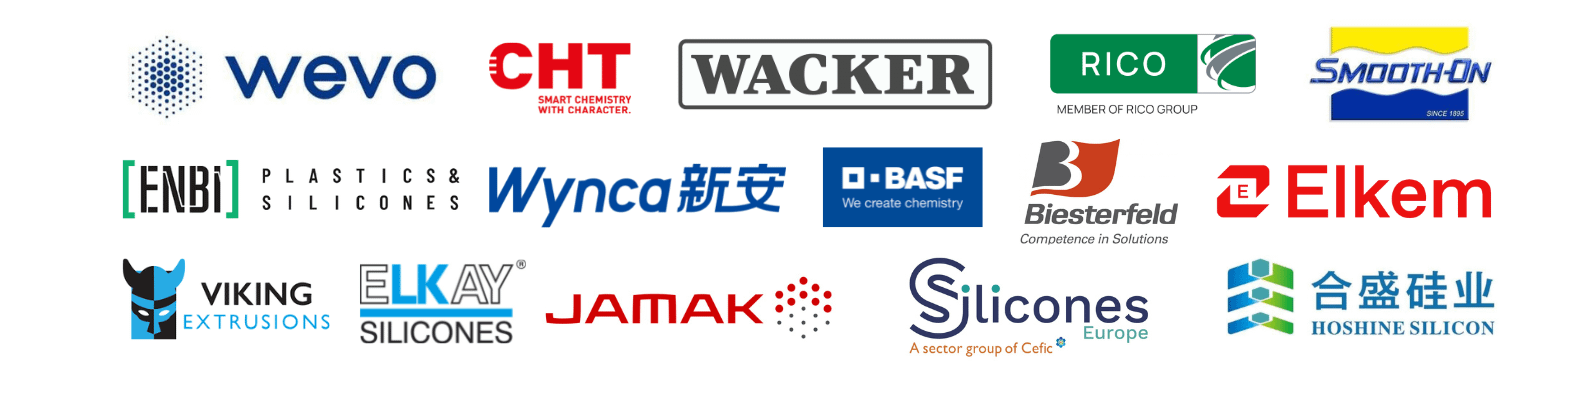 Logos of exhibitors, sponsors and partners